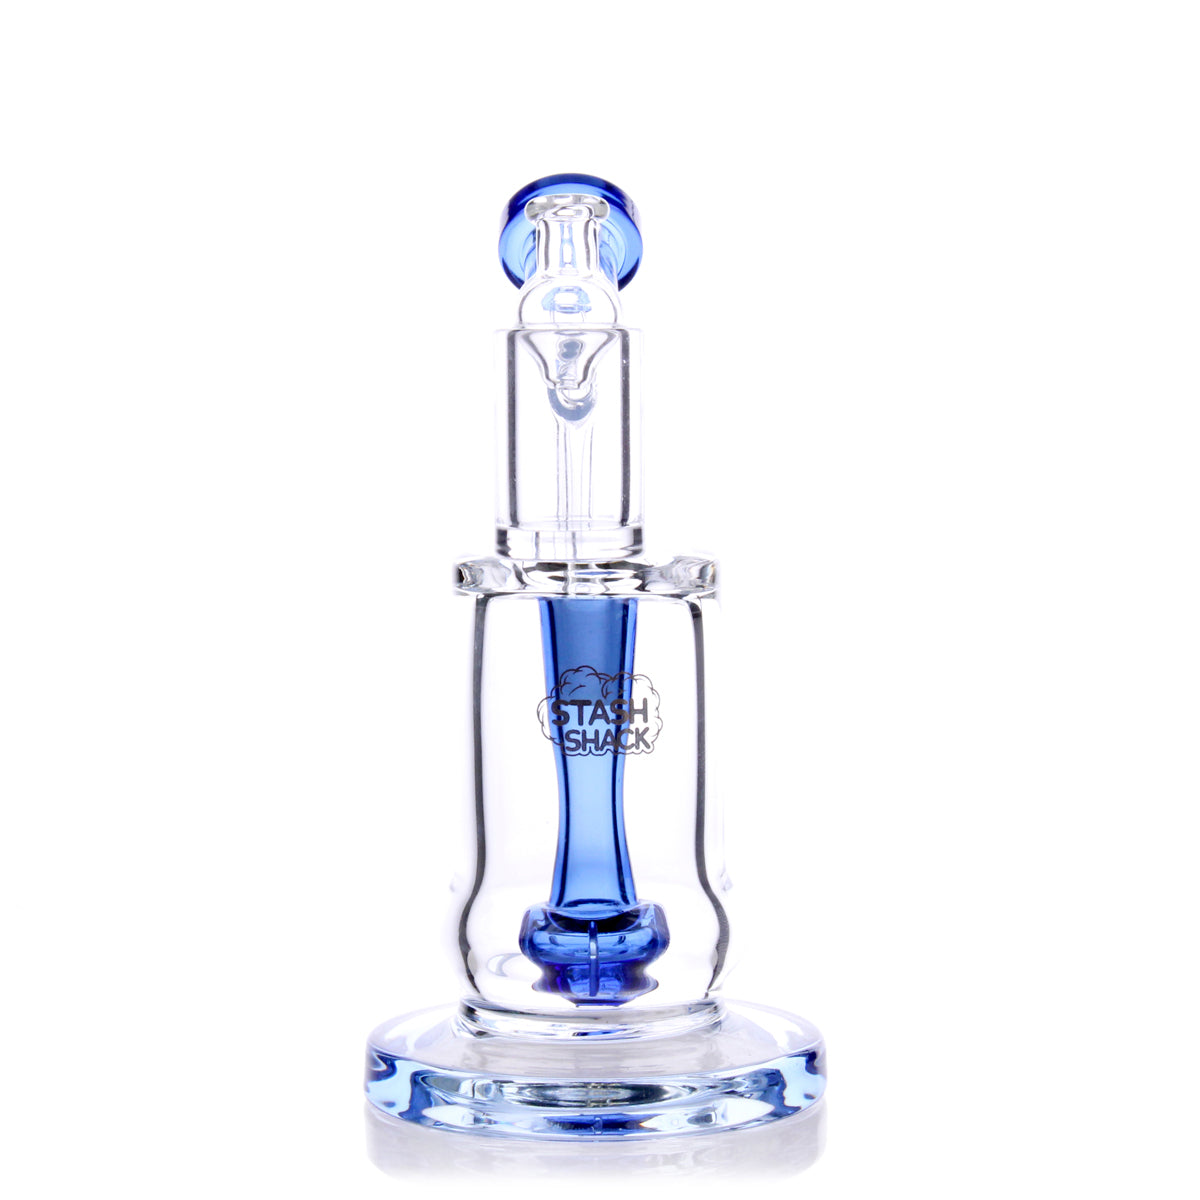 HydroBarrel Mini Rig by The Stash Shack in blue, compact 5" banger hanger design with showerhead percolator, front view